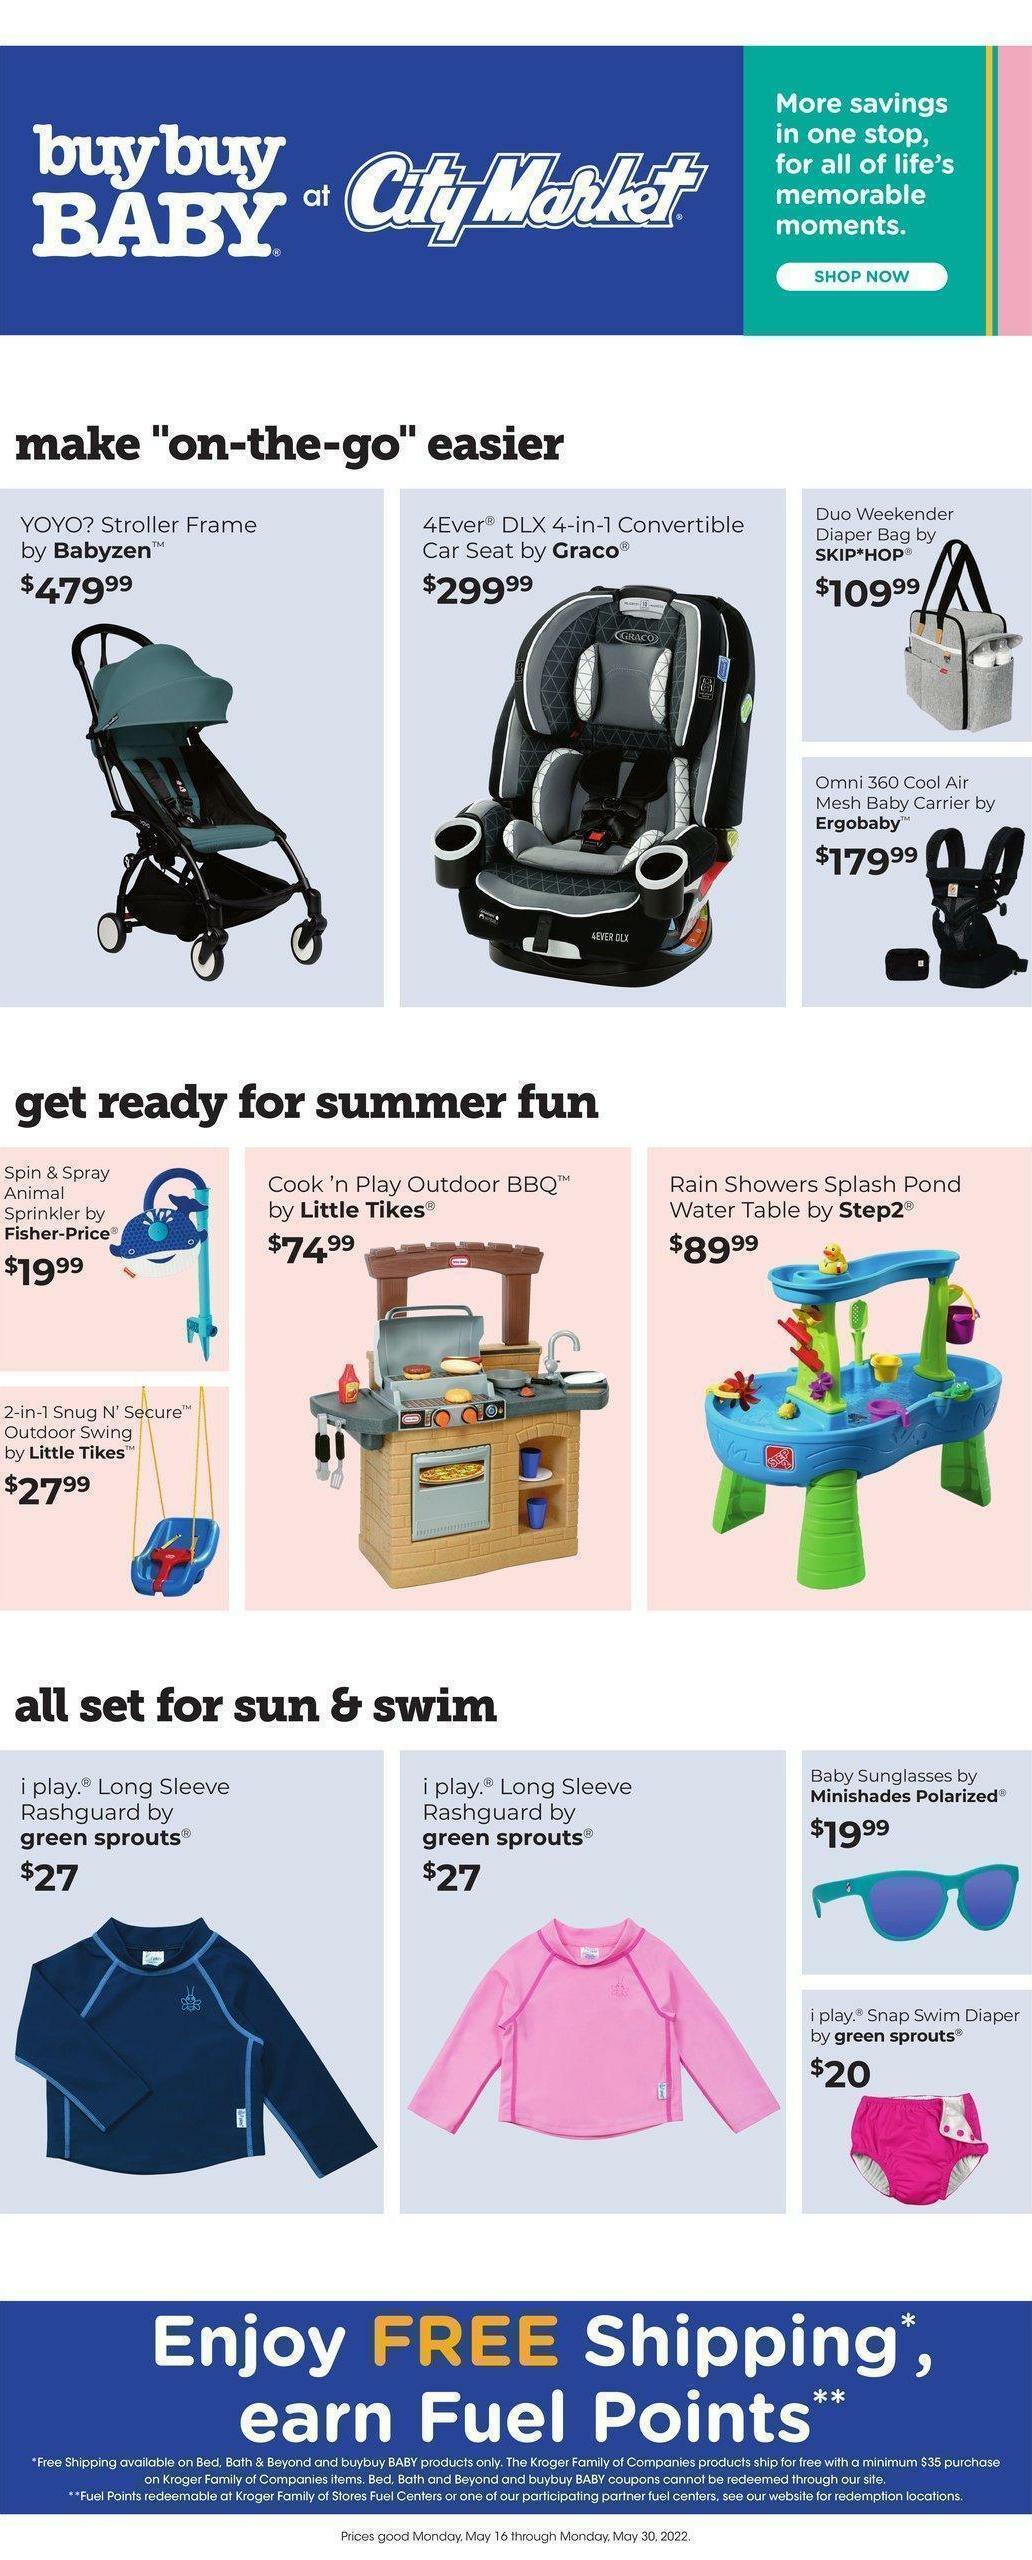 City Market Bed, Bath & Beyond Weekly Ad from May 16